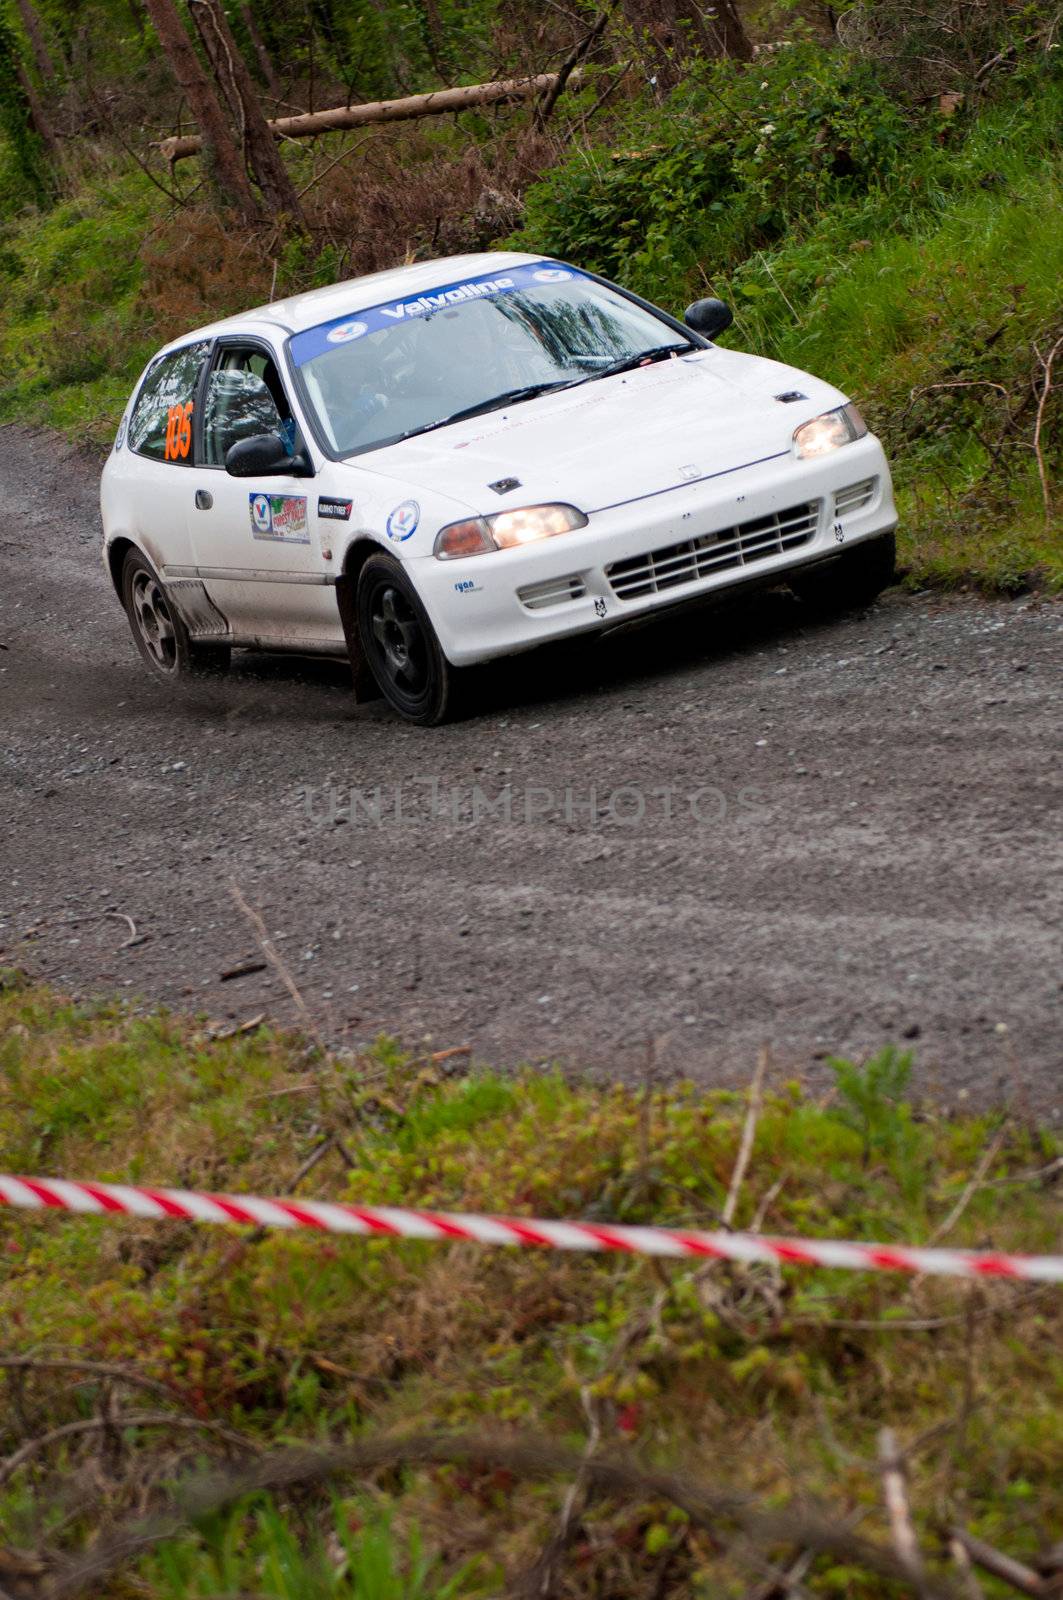 MALLOW, IRELAND - MAY 19: M. Ryan driving Honda Civic at the Jim Walsh Cork Forest Rally on May 19, 2012 in Mallow, Ireland. 4th round of the Valvoline National Forest Rally Championship.